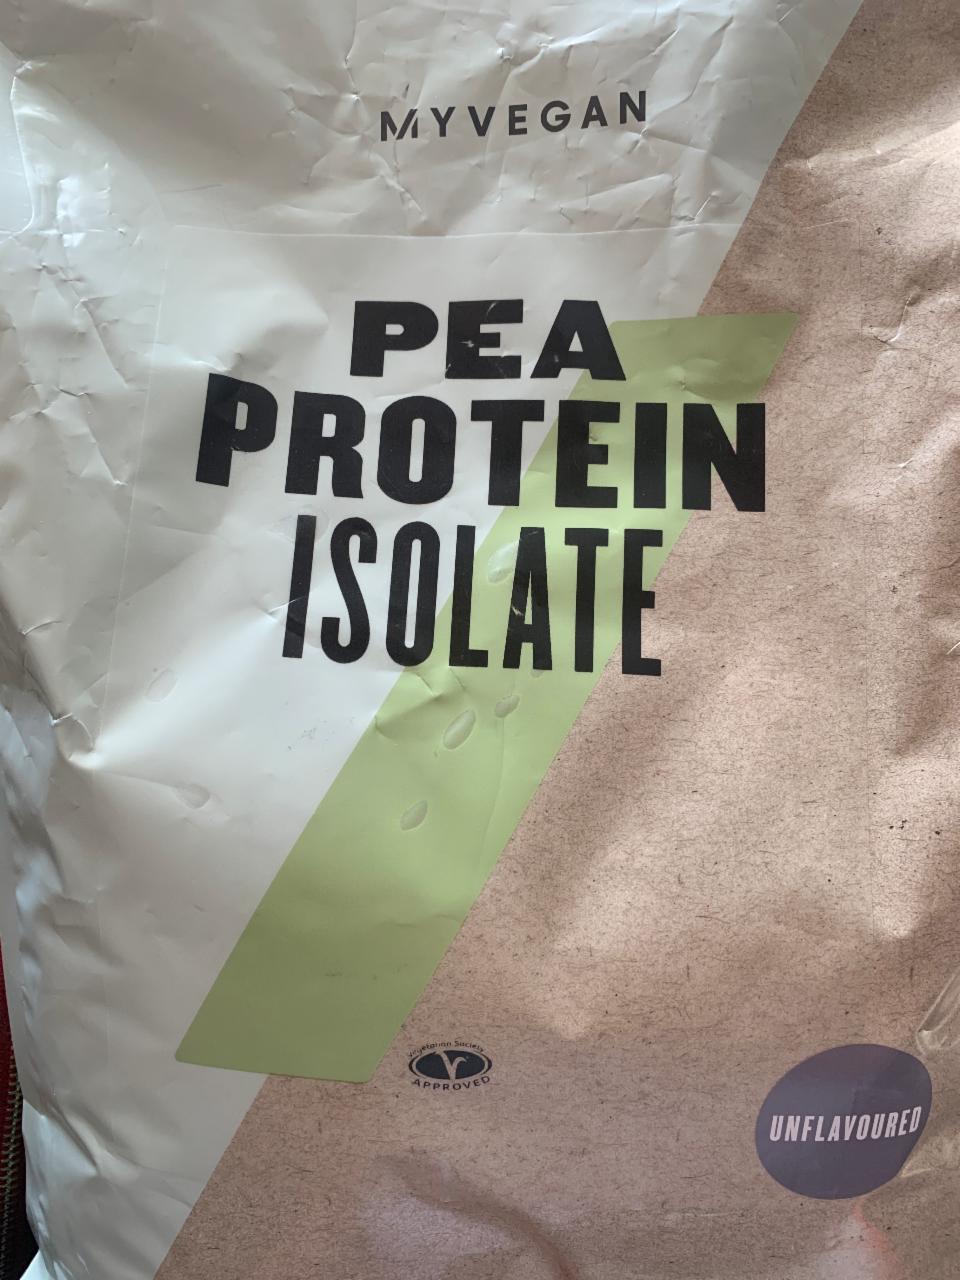 Fotografie - Pea protein isolate unflavoured